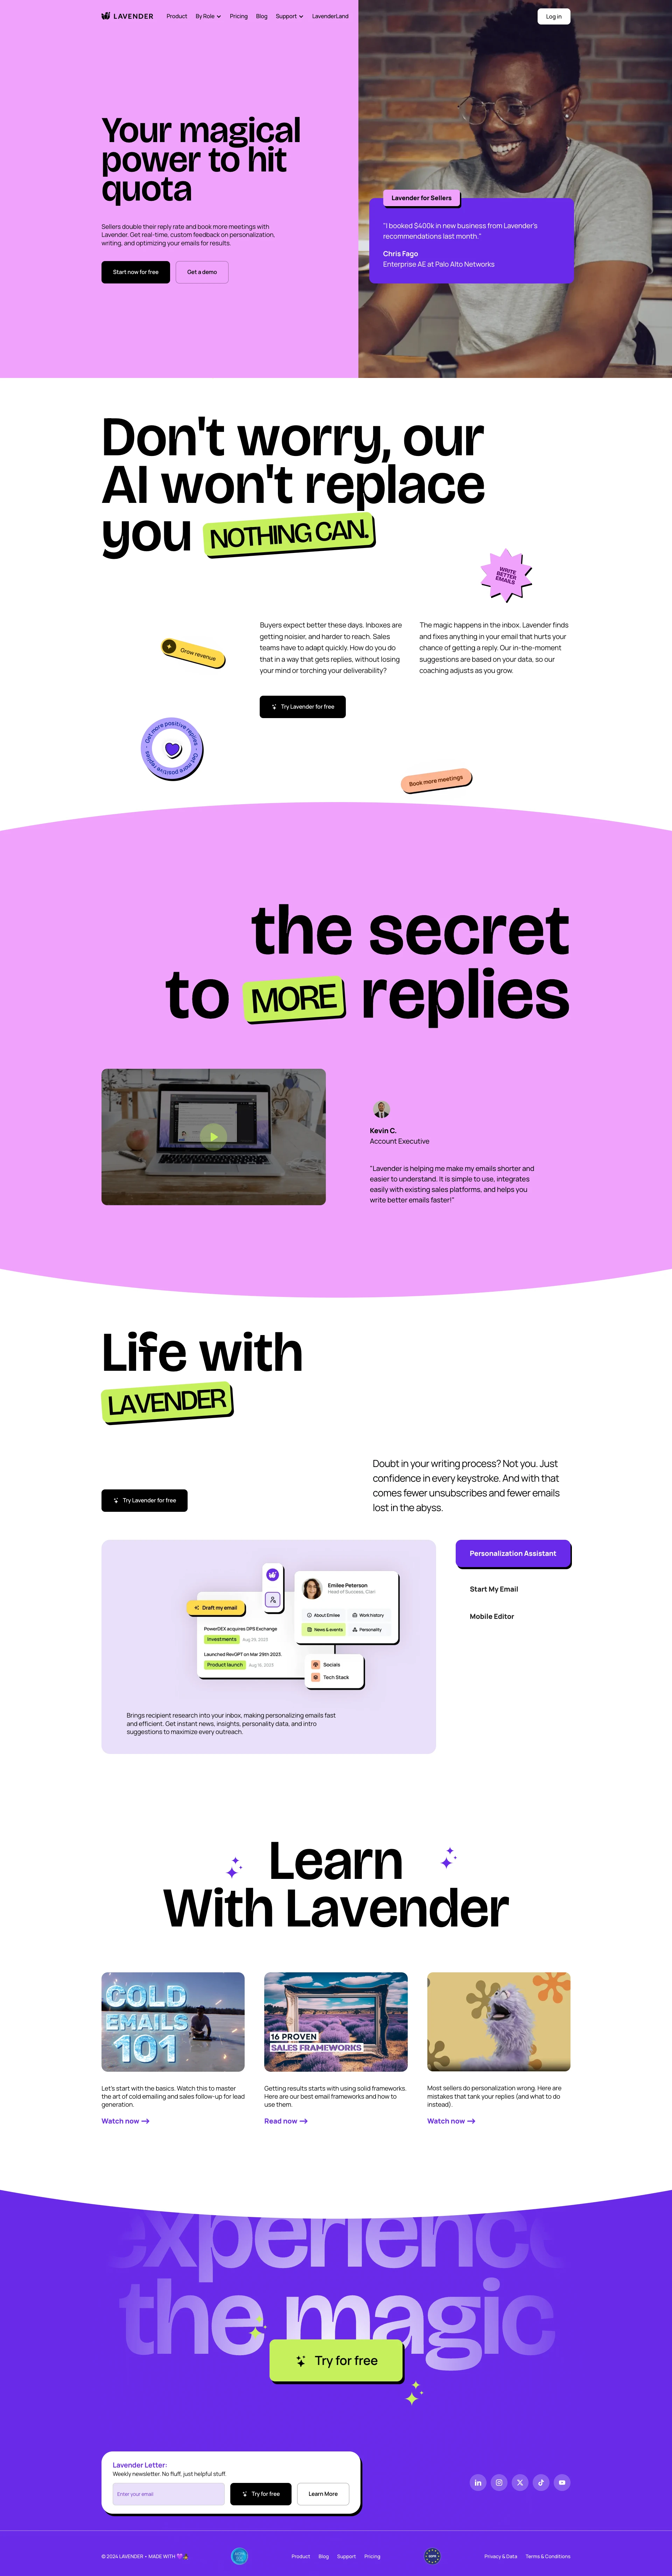 Lavender Landing Page Example: Lavender helps thousands of sellers around the world write better emails faster and get more positive replies in less time.